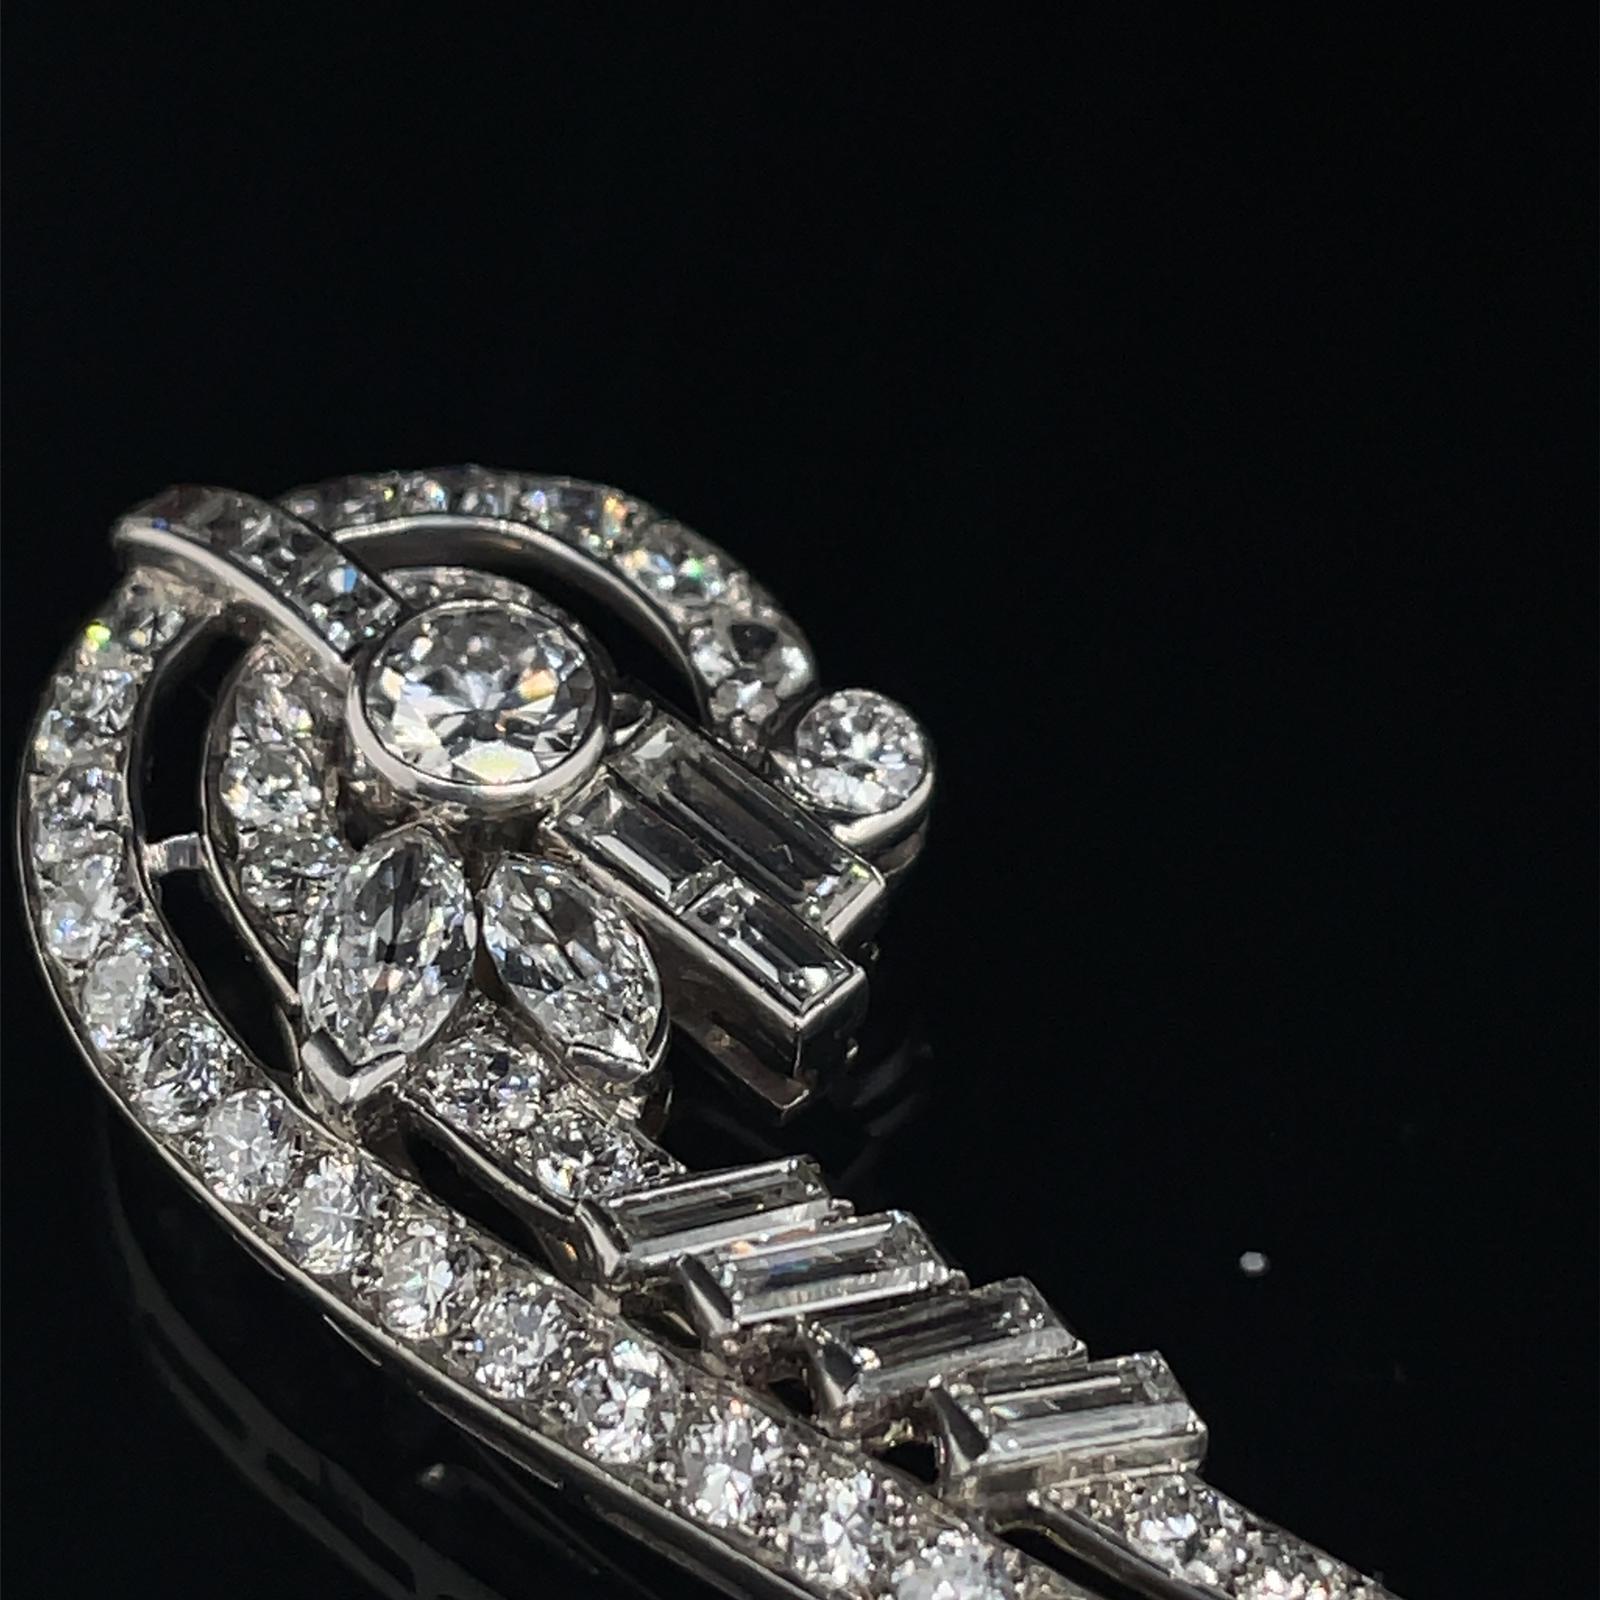 A Mid 20th century platinum diamond hairclip.

This beautiful Mid 20th Century Hair Clip/Brooch in the Art Deco style, is made in France.

Designed as a gently curved elongated wing shape, grain set with transitional cut diamonds along its length